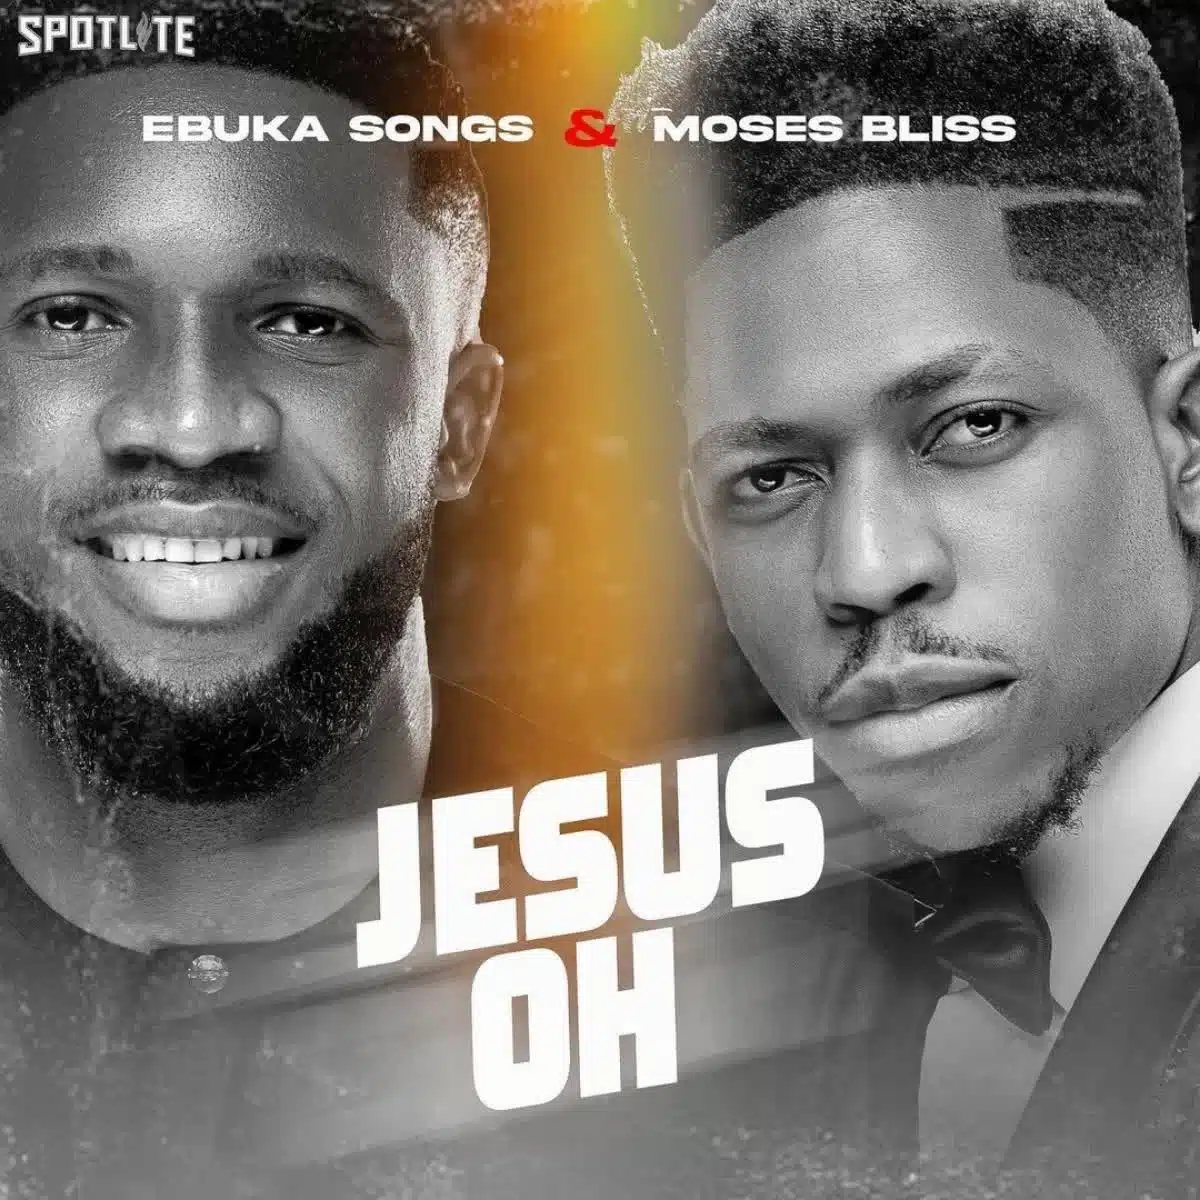 DOWNLOAD: Ebuka Songs & Moses Bliss – “Jesus Oh” Mp3